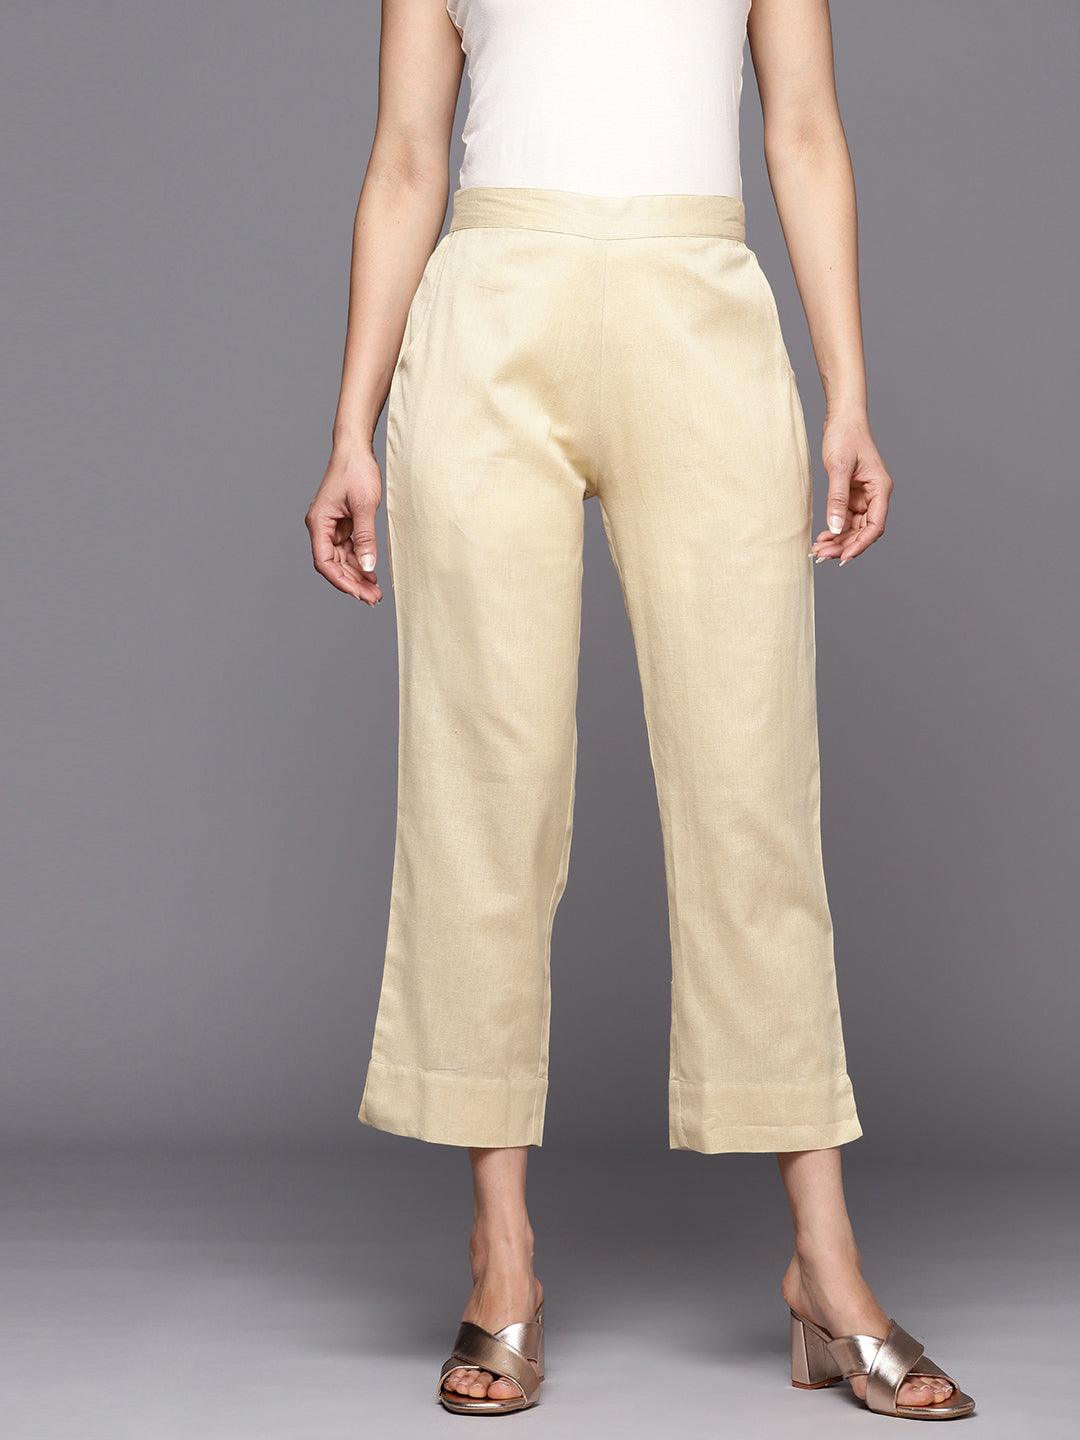 Buy Beige Solid Cotton Trousers Online at Rs.569 | Libas